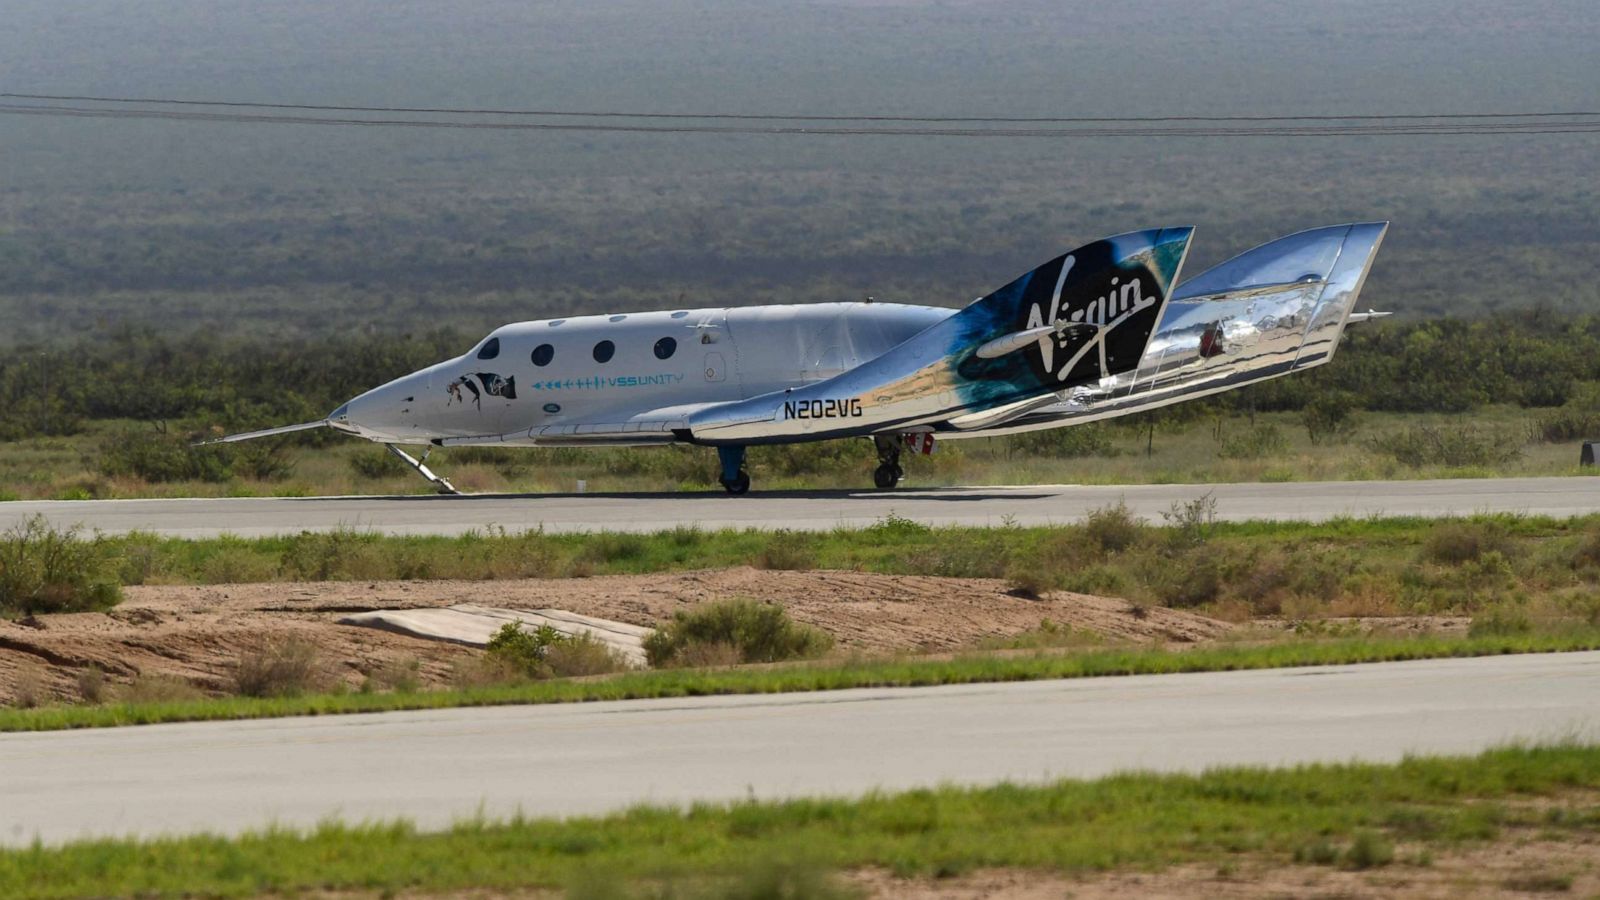 Richard Branson, crew go to space and back on Virgin Galactic spaceship -  ABC News